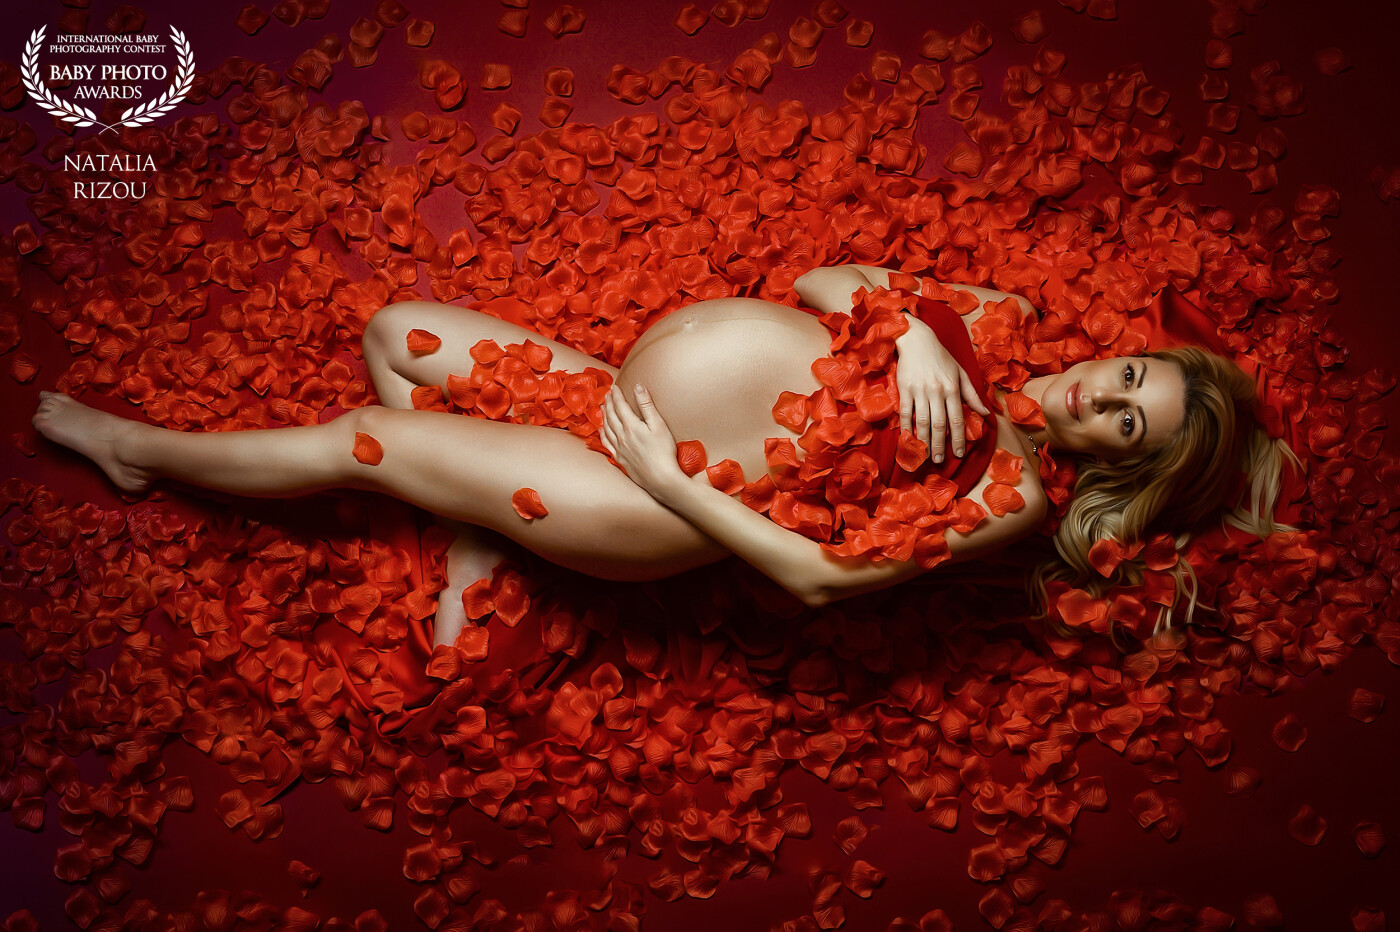 The colour red symbolizes so many elements in life; energy, passion, strength, courage, warmth, security and many more. It is a powerful color and all these are representative of a woman during pregnancy. Nothing is more creative and miraculous as the conception of a child.